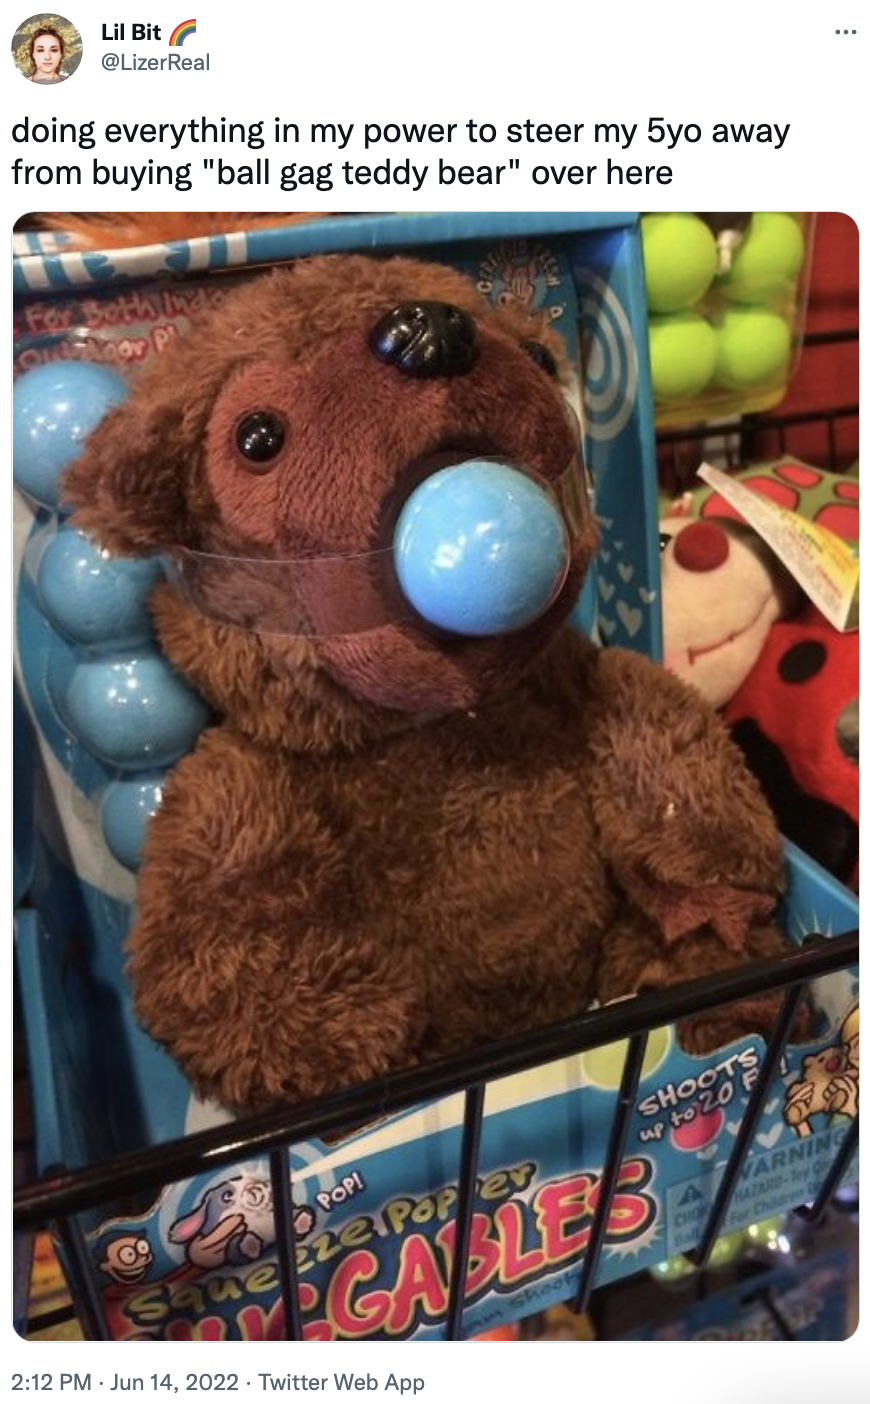 doing everything in my power to steer away my 5 year old from buying "bull gag teddy bear" over here. and then a photo of a teddy bear in the store that's being gagged with a ball